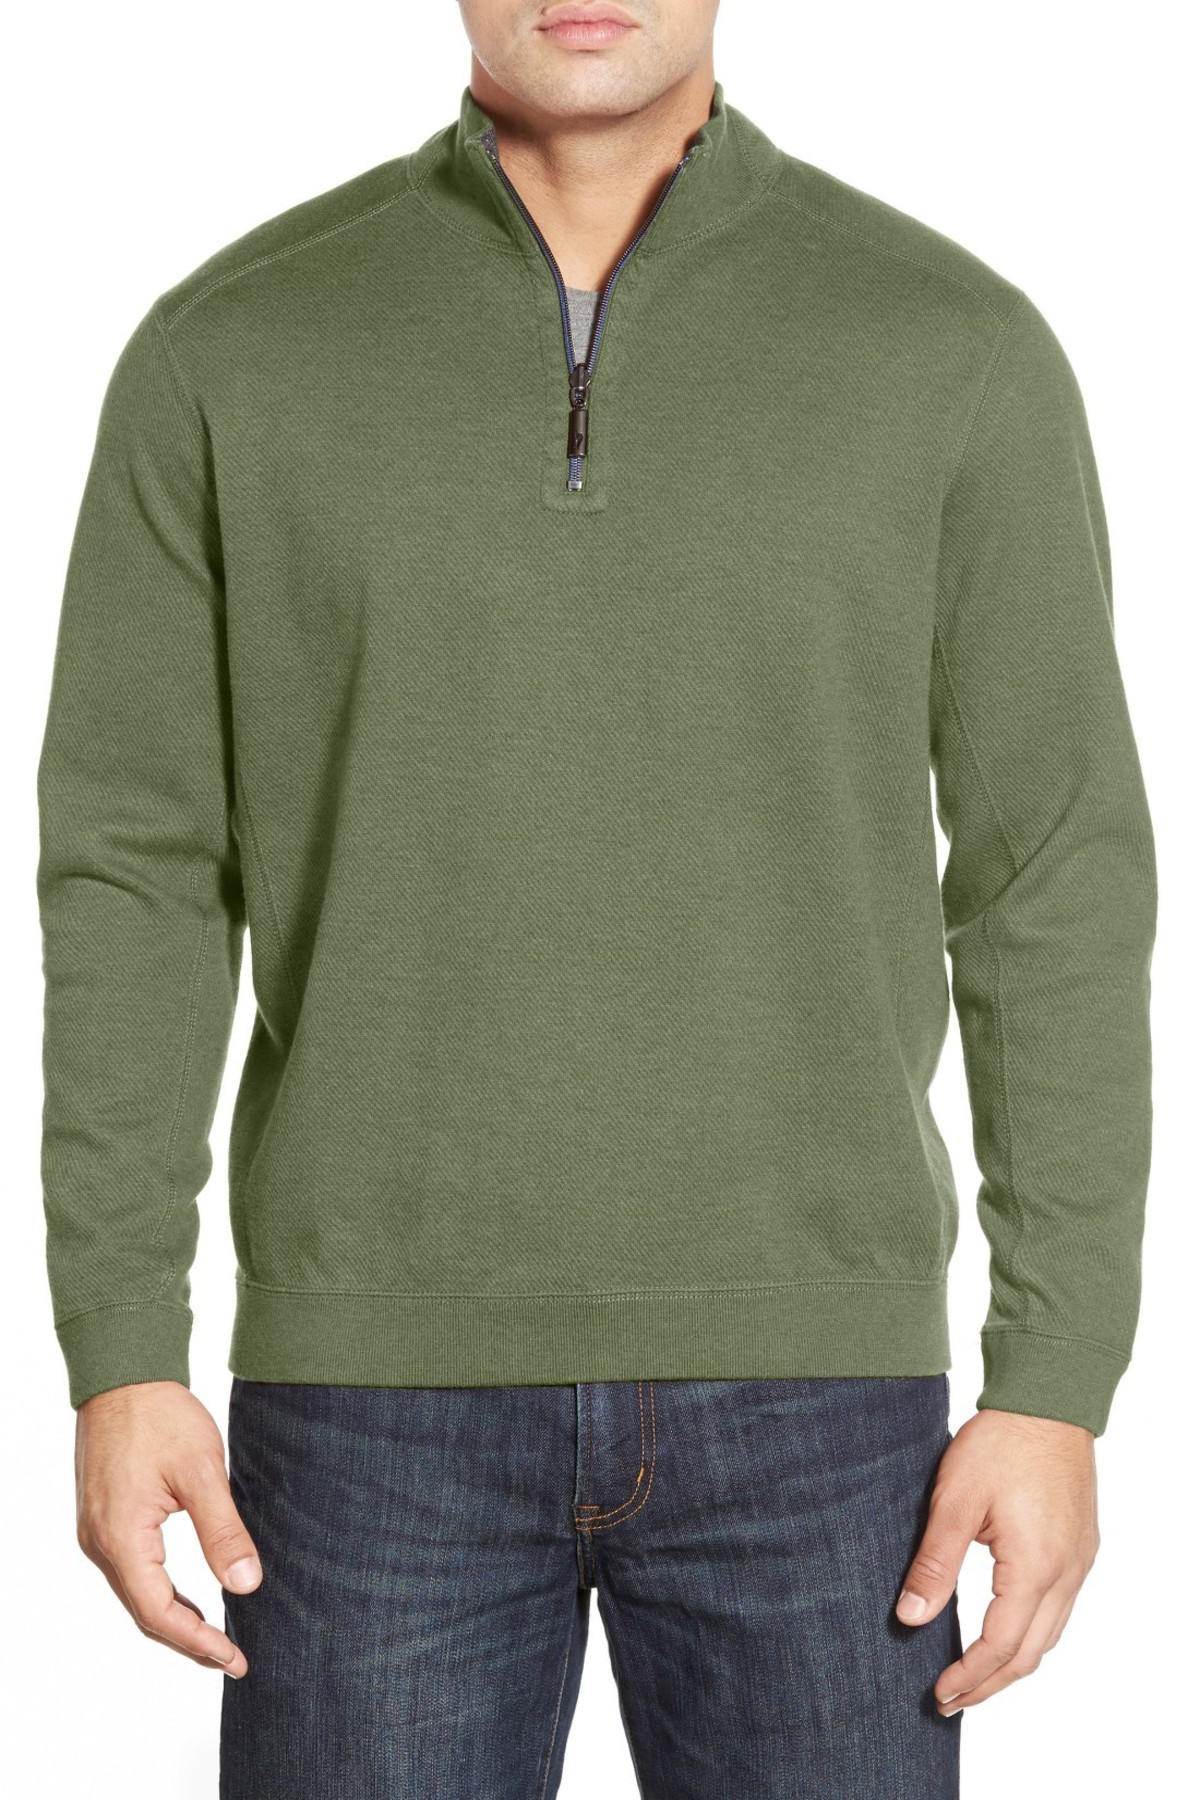 Tommy Bahama Cotton Flip Side Reversible Quarter Zip Twill Pullover in ...